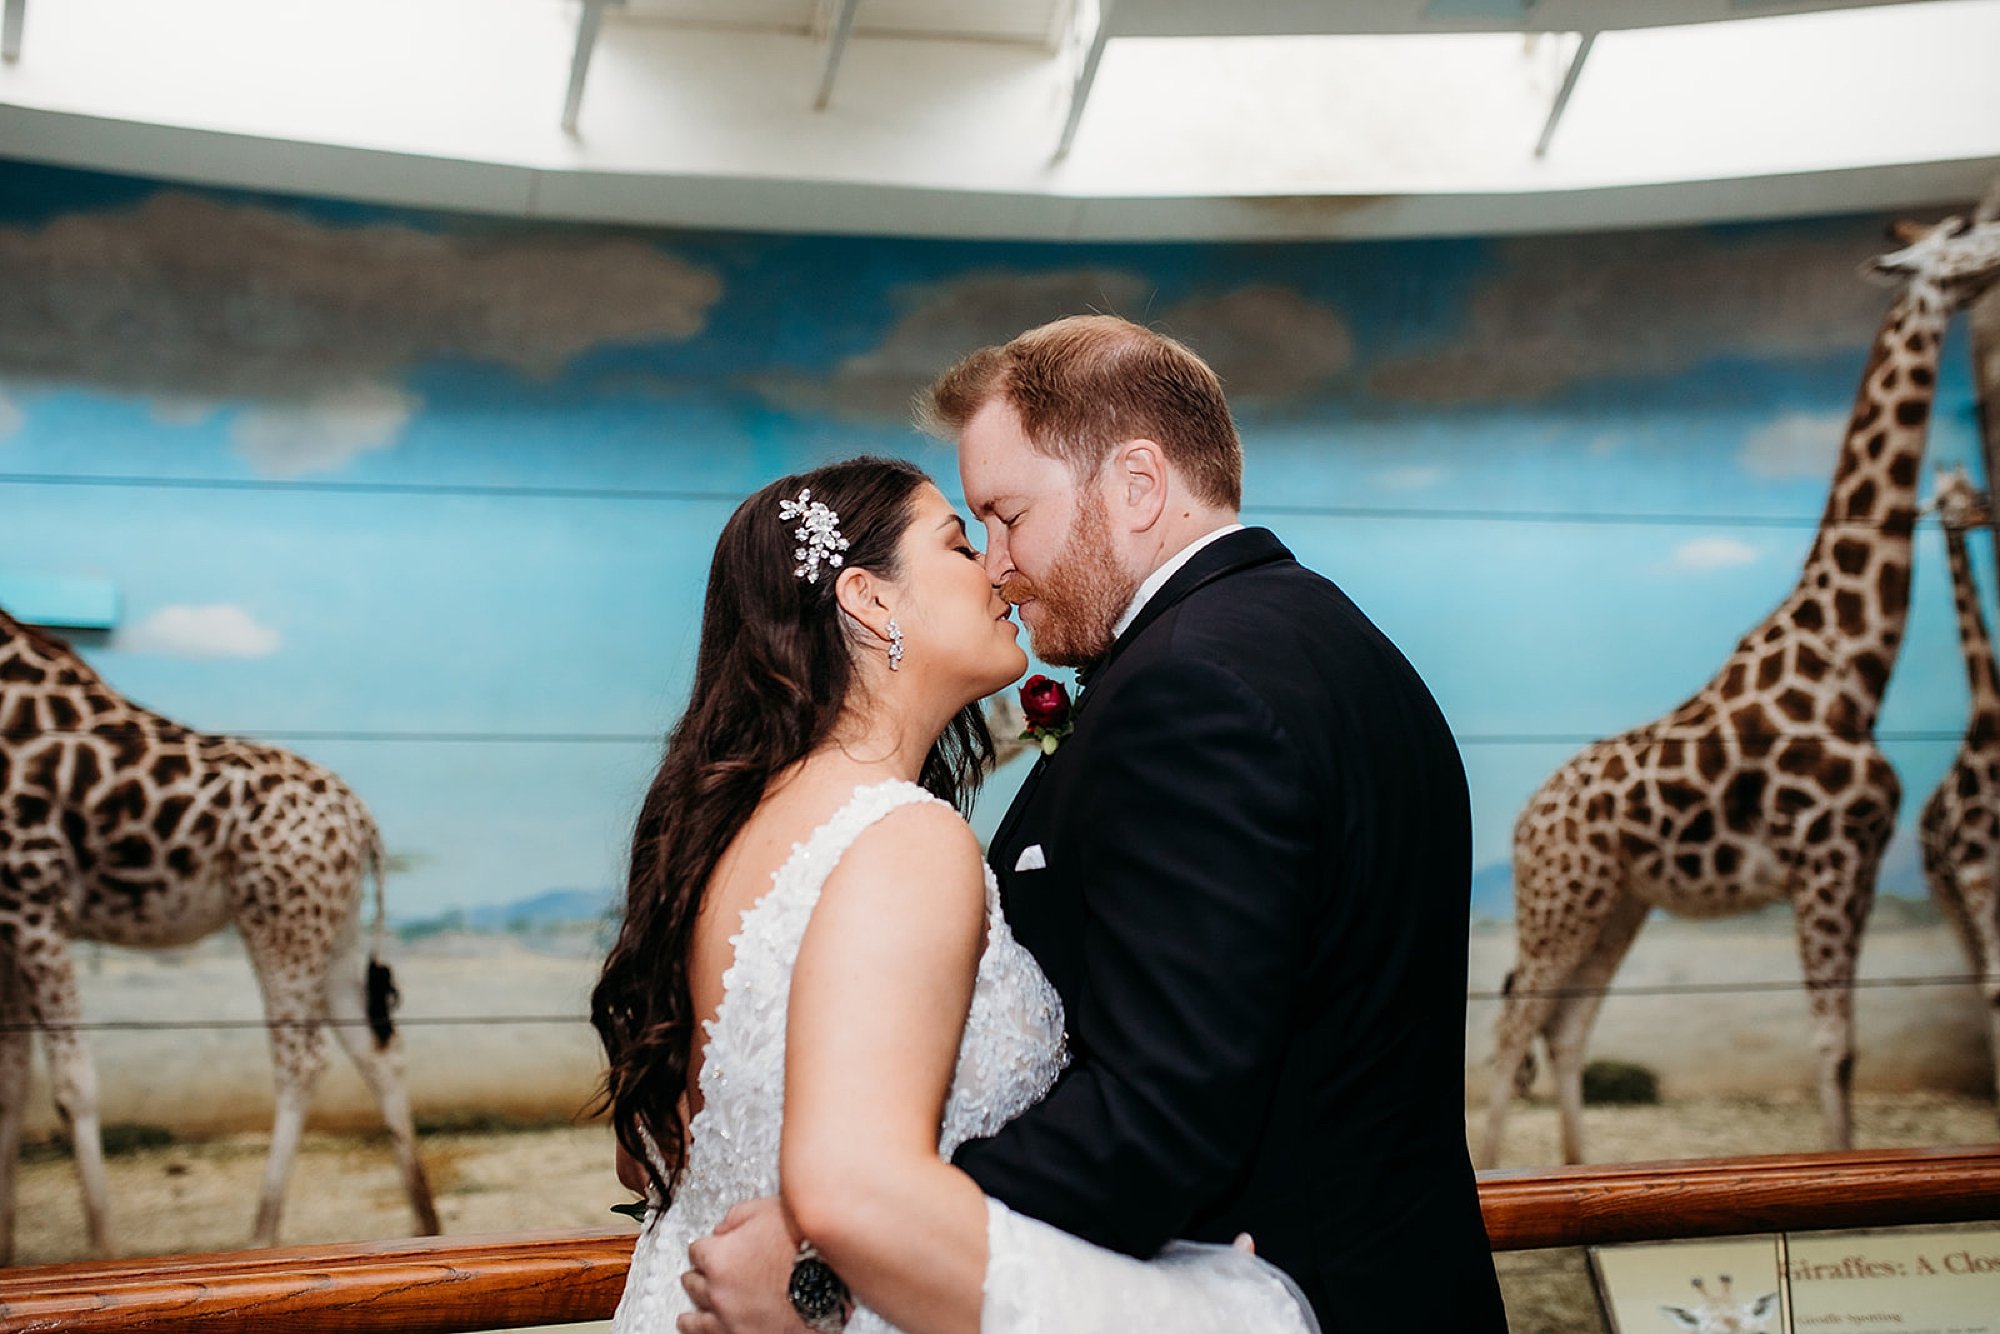 newlyweds lean together kissing with giraffes behind them at the Bronx Zoo